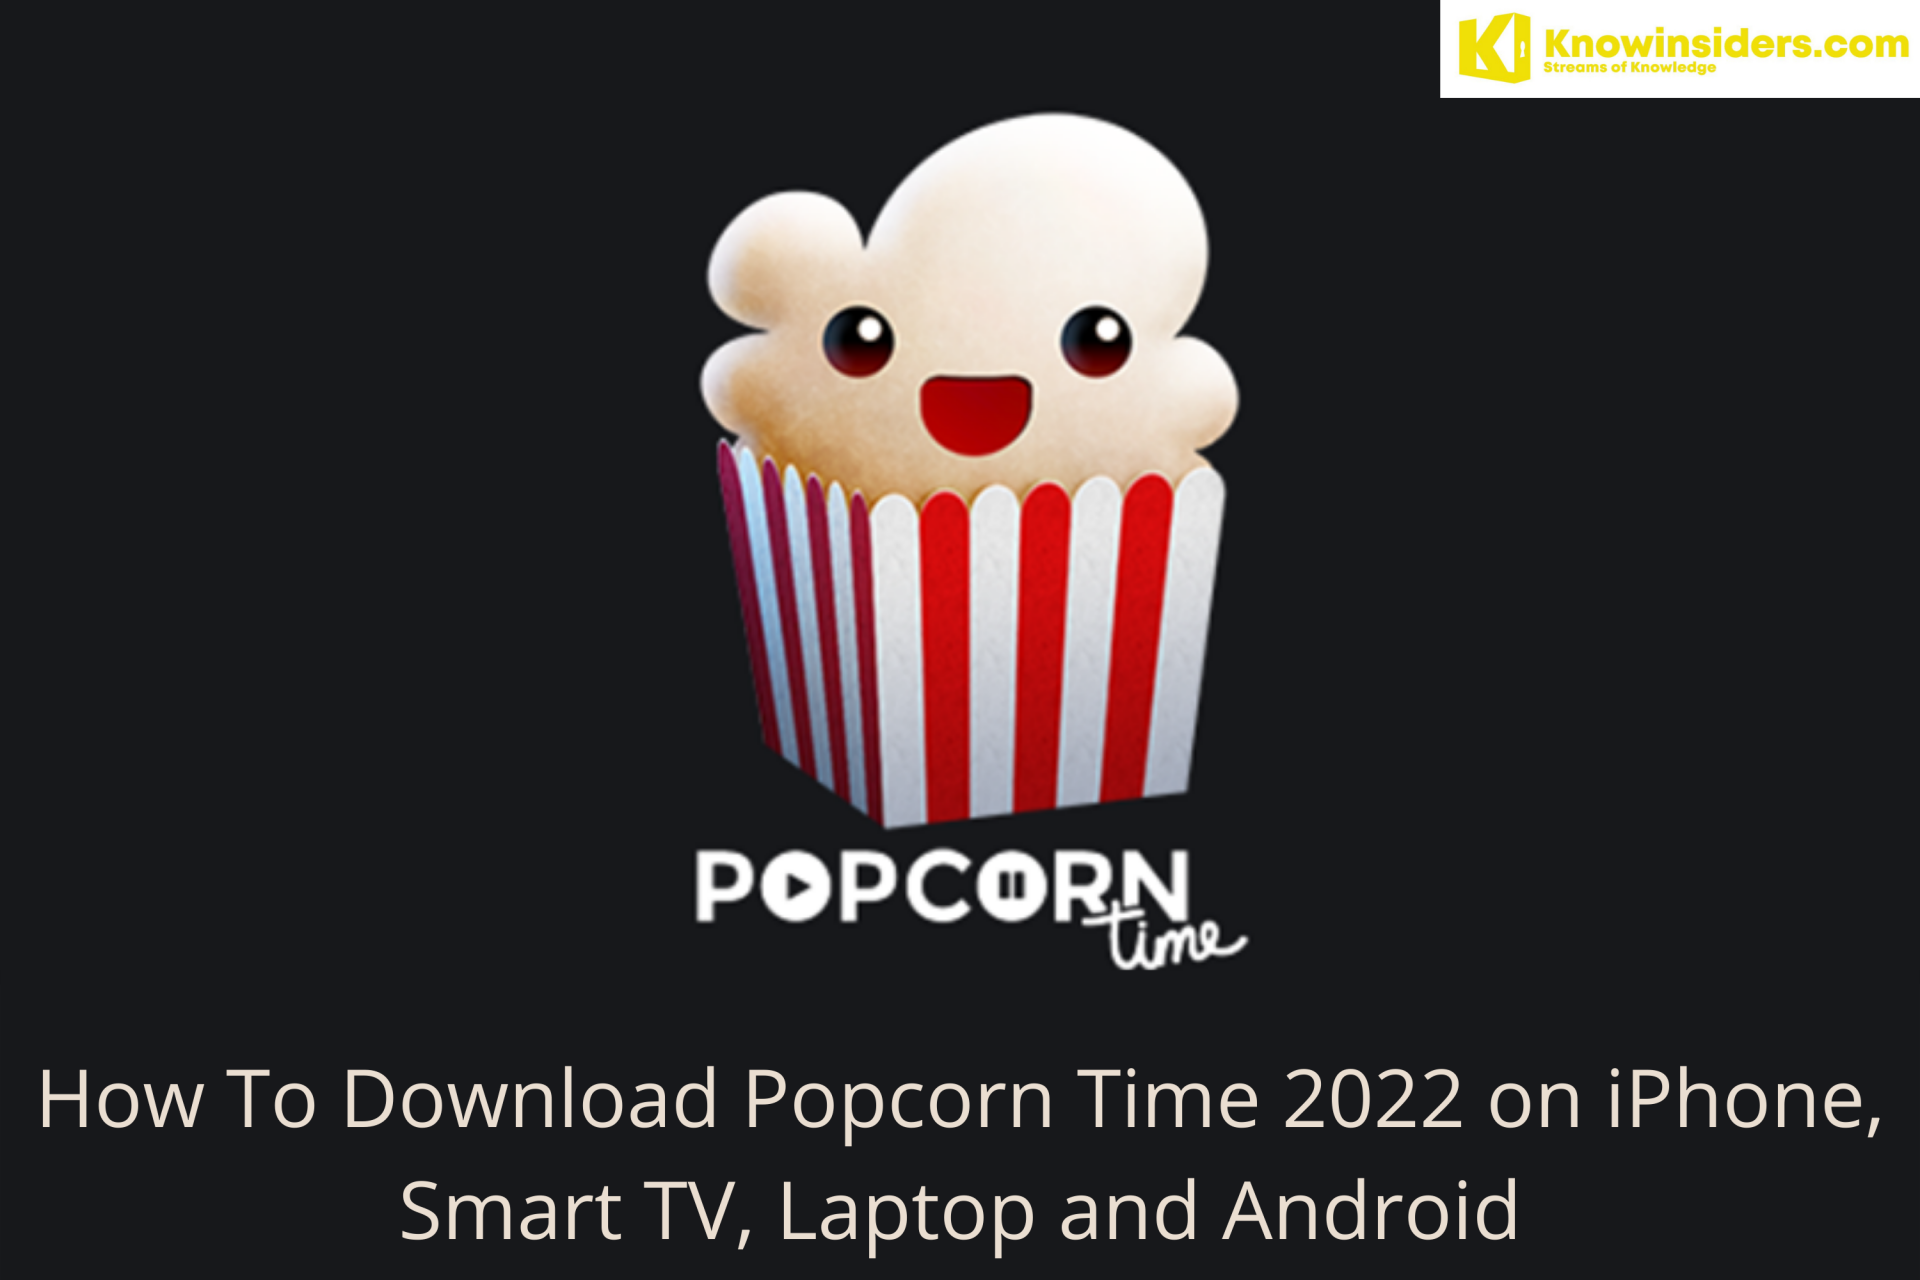 How To Download Popcorn Time on iPhone, Smart TV, Laptop and Android